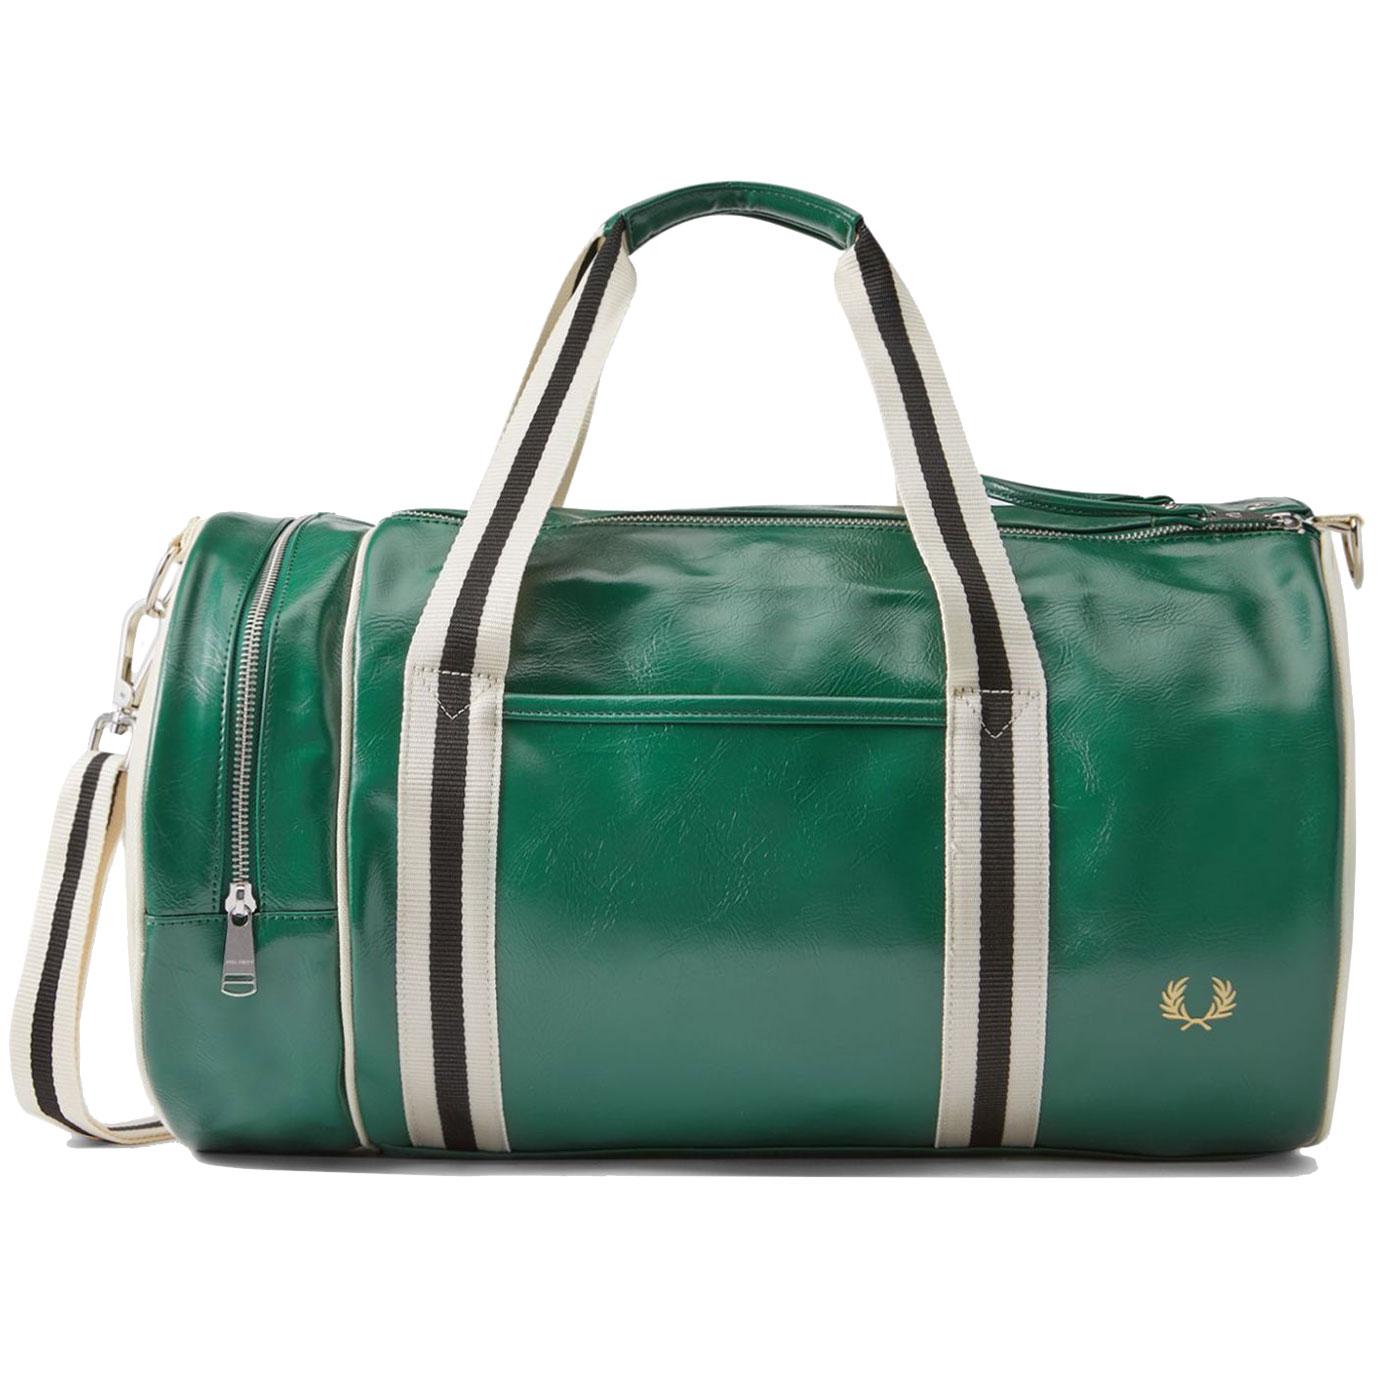 FRED PERRY Retro Classic Barrel Weekend Bag in Ivy